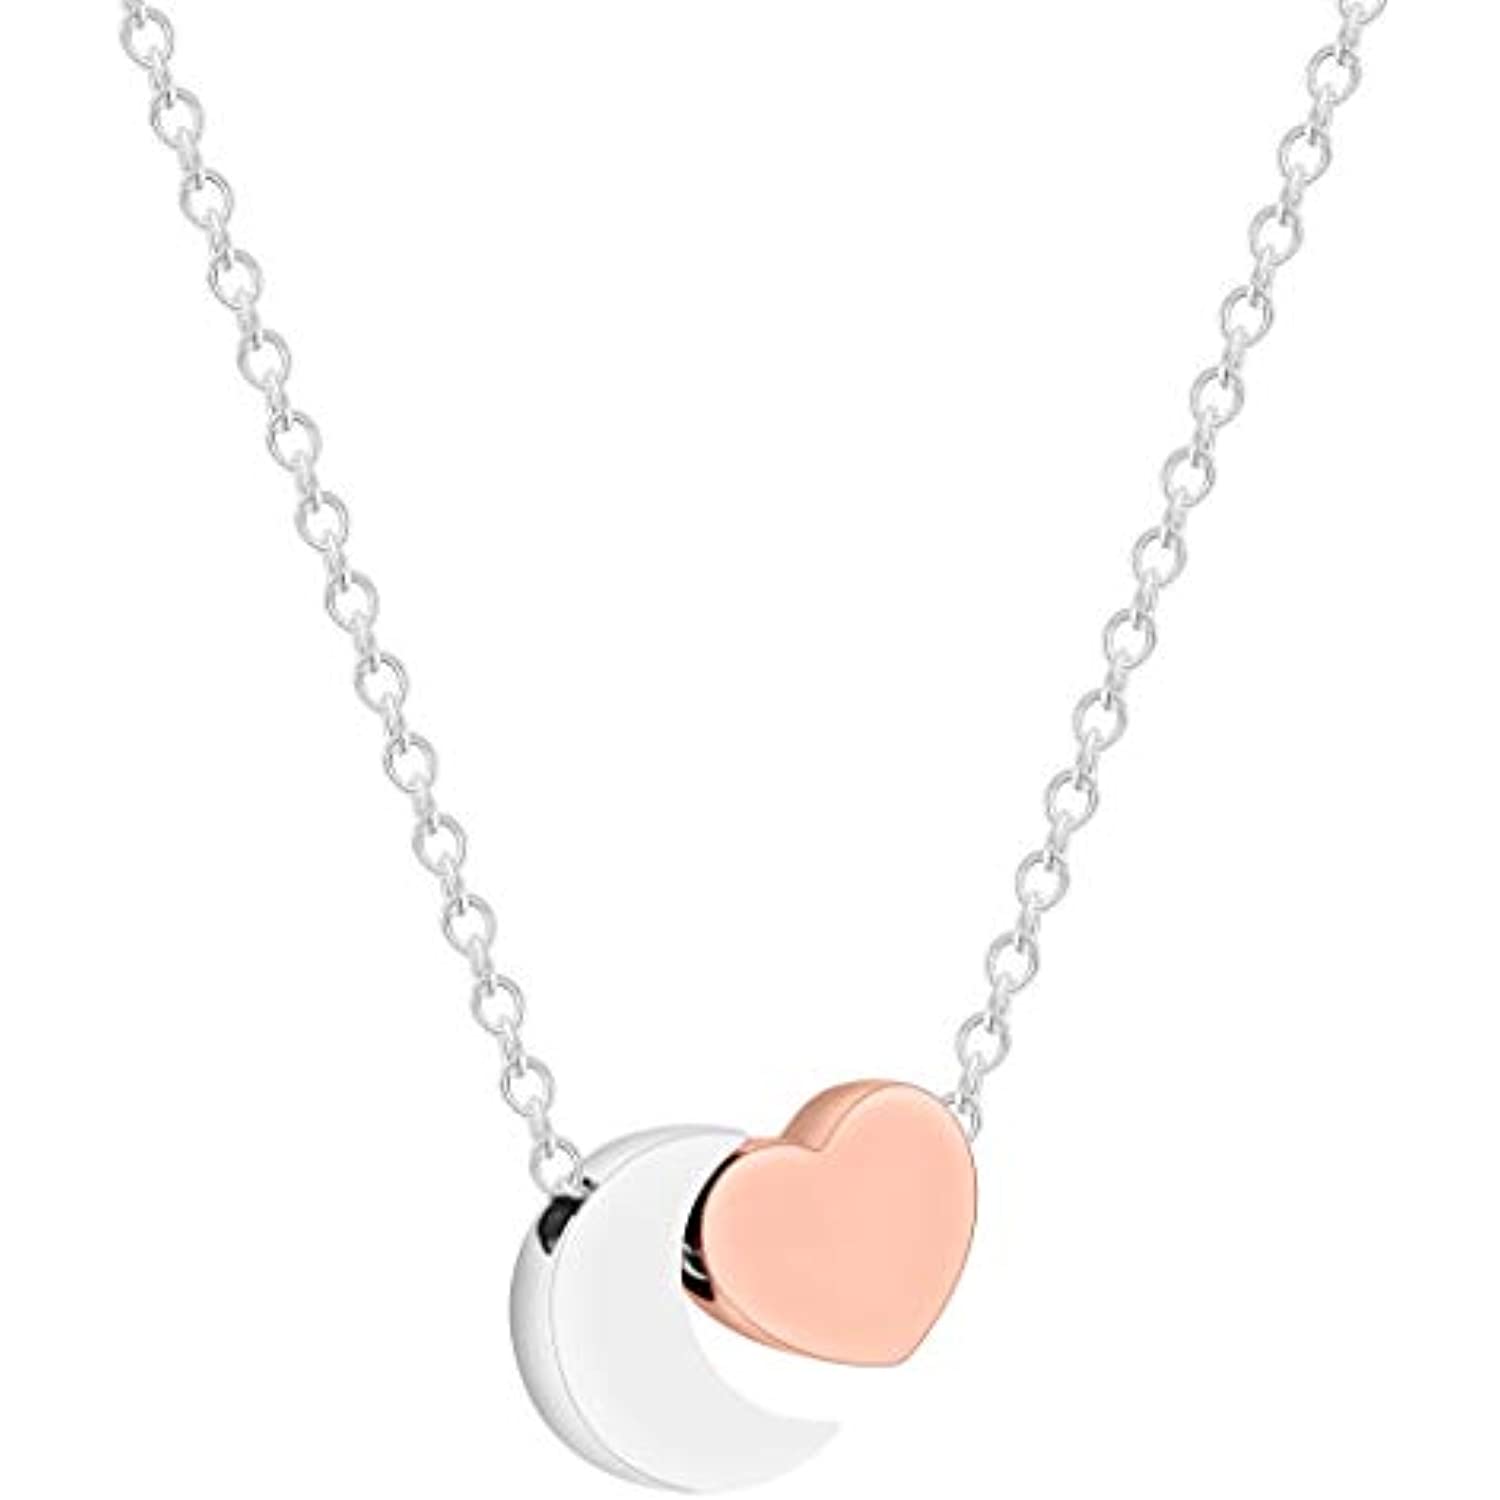 Daughter Jewelry Necklace Gift from Mom, Dad I Love You To The Moon and Back Heart & Moon Pendant Necklace, Jewelry Presents from Mother/Father Girls, Teens, Women, Adults (2-Tone Rose/Silver) - image 2 of 5